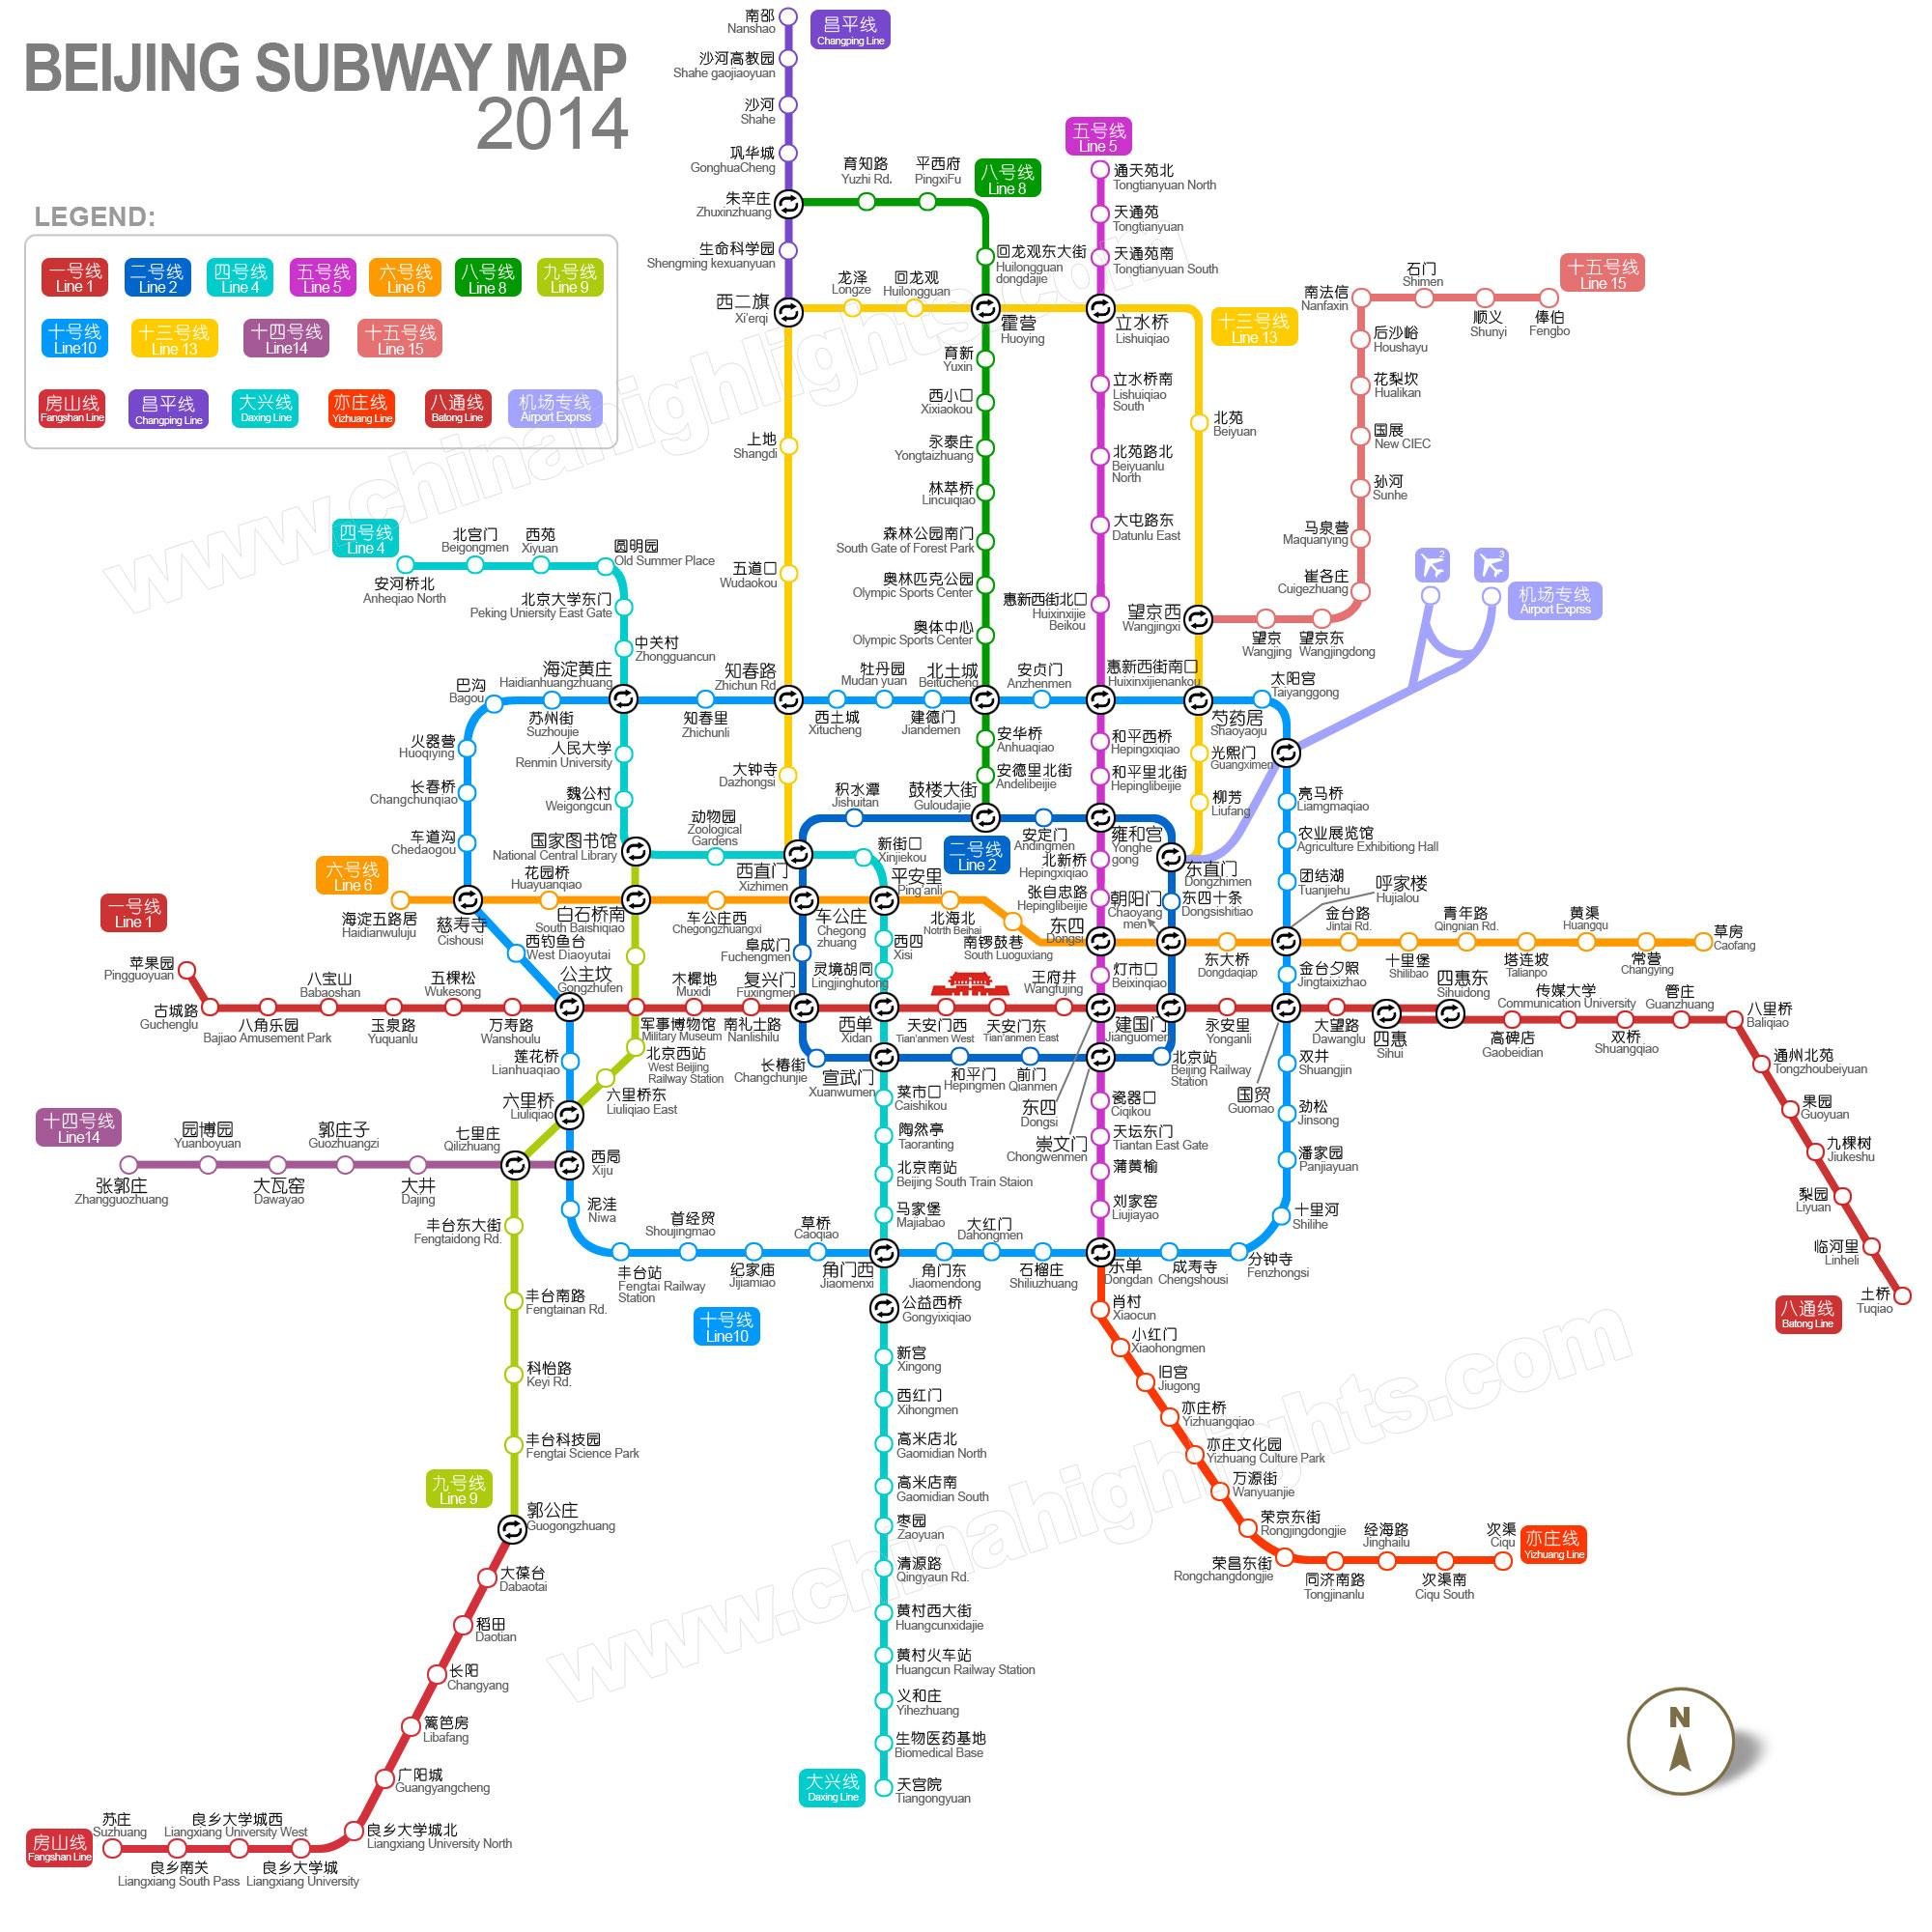 Beijing Subway Map, Latest Maps of Beijing Subway and Stations